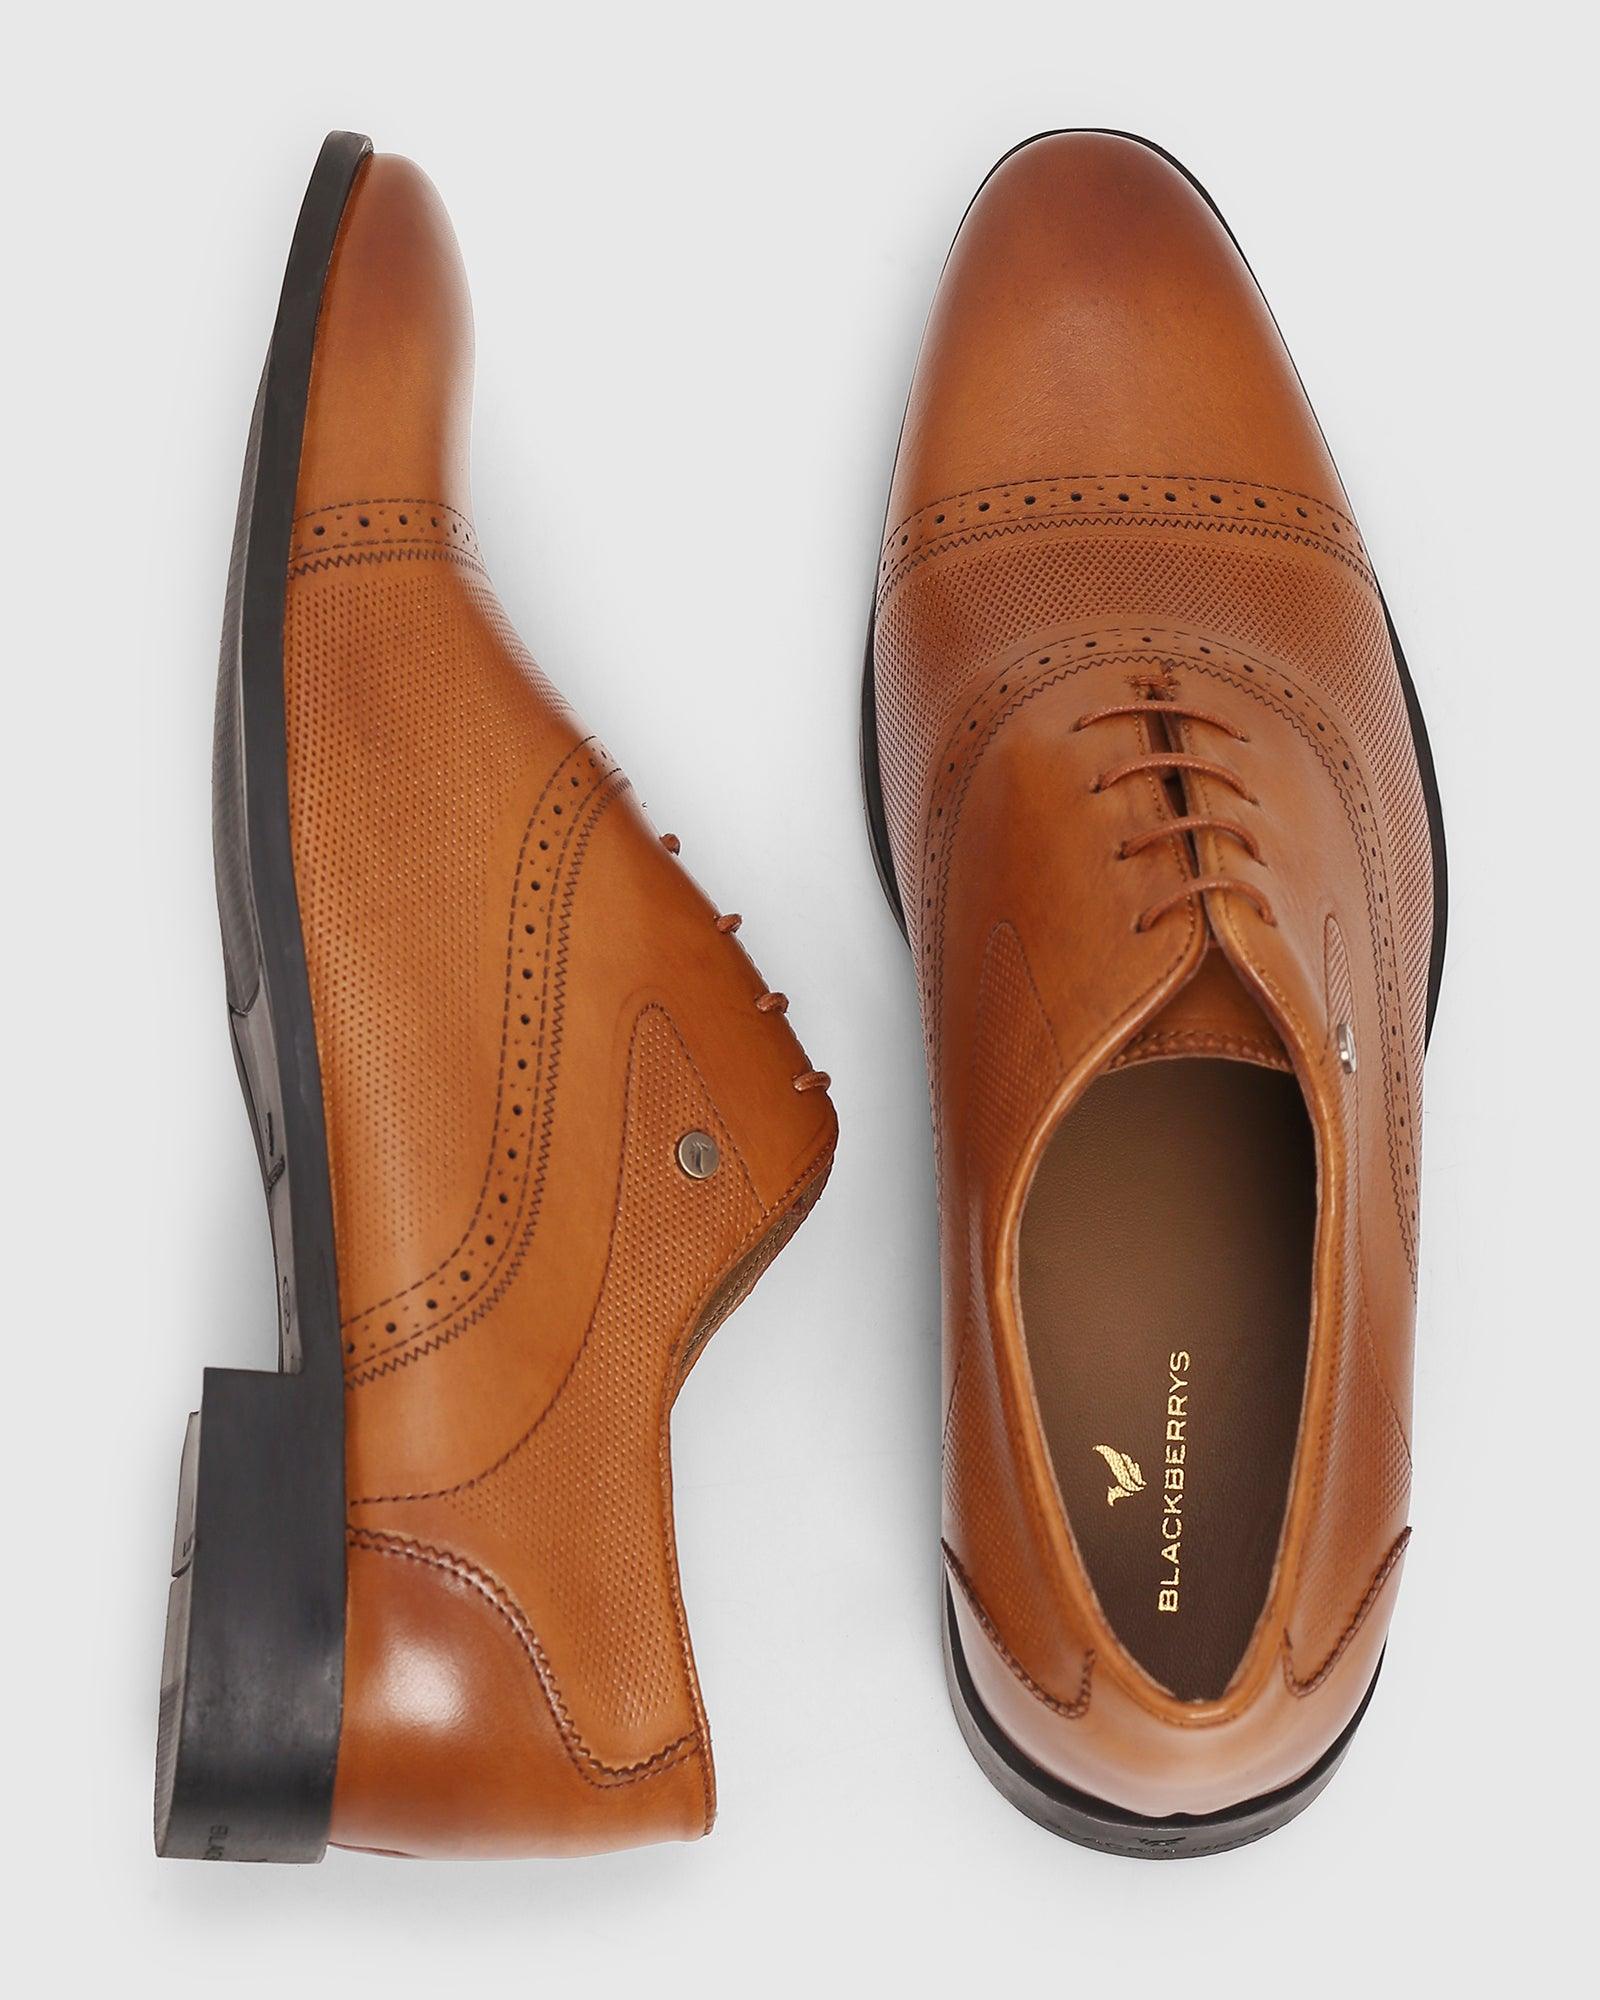 Must Haves Leather Tan Textured Oxford Shoes - Lewis